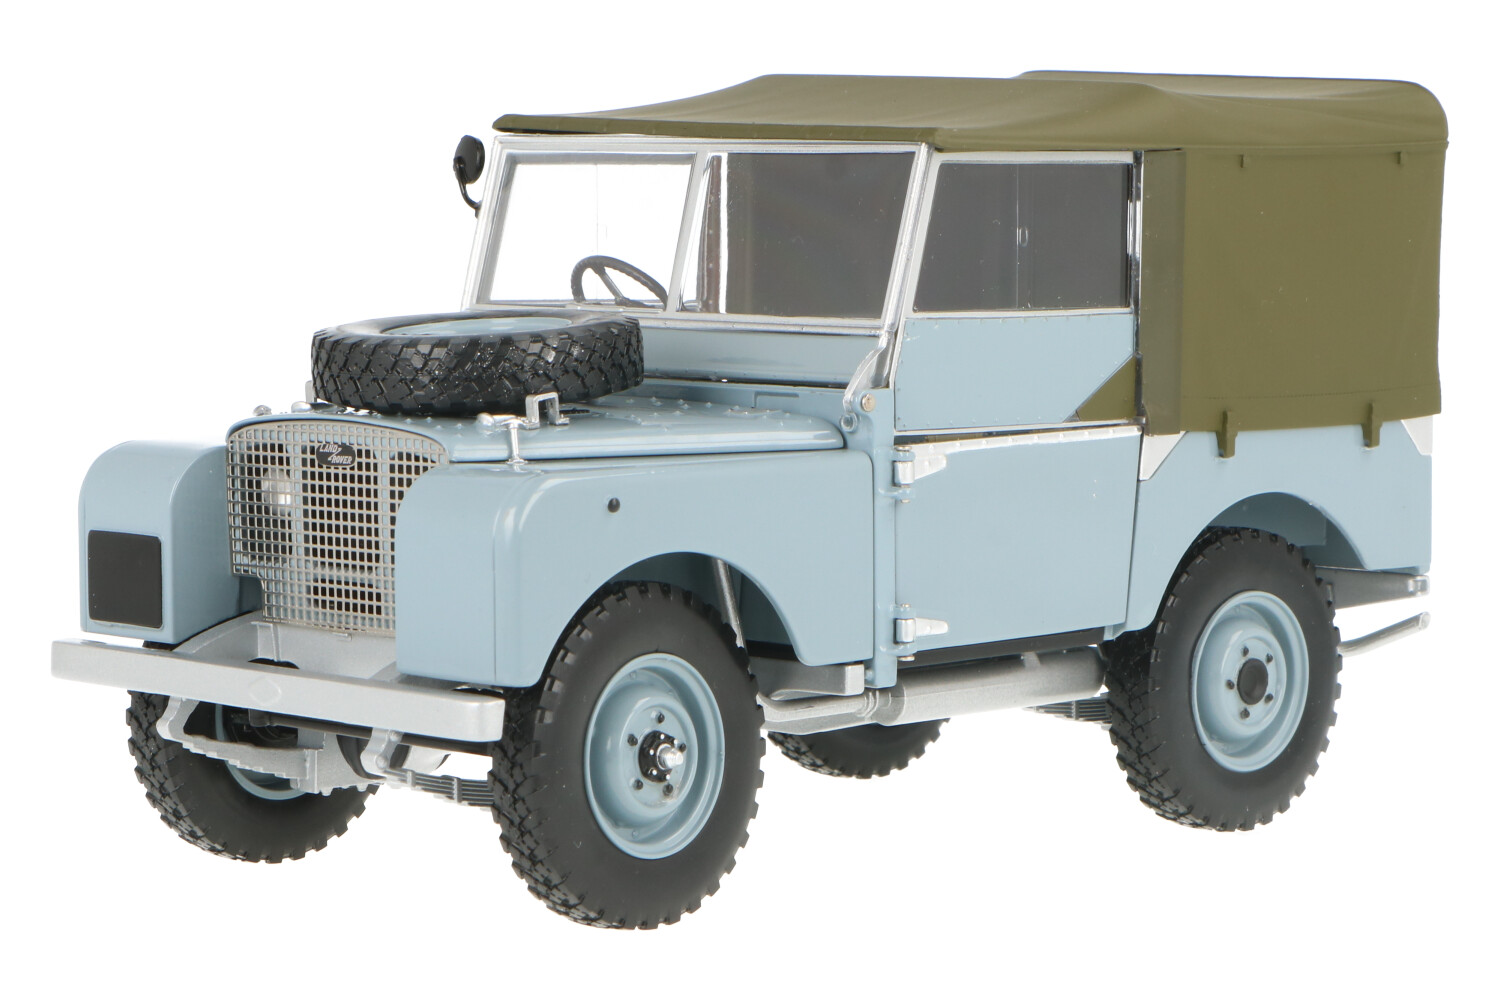 Land-Rover-88-Series-I-150168904_13154012138123779Land-Rover-88-Series-I-150168904_Houseofmodelcars_.jpg